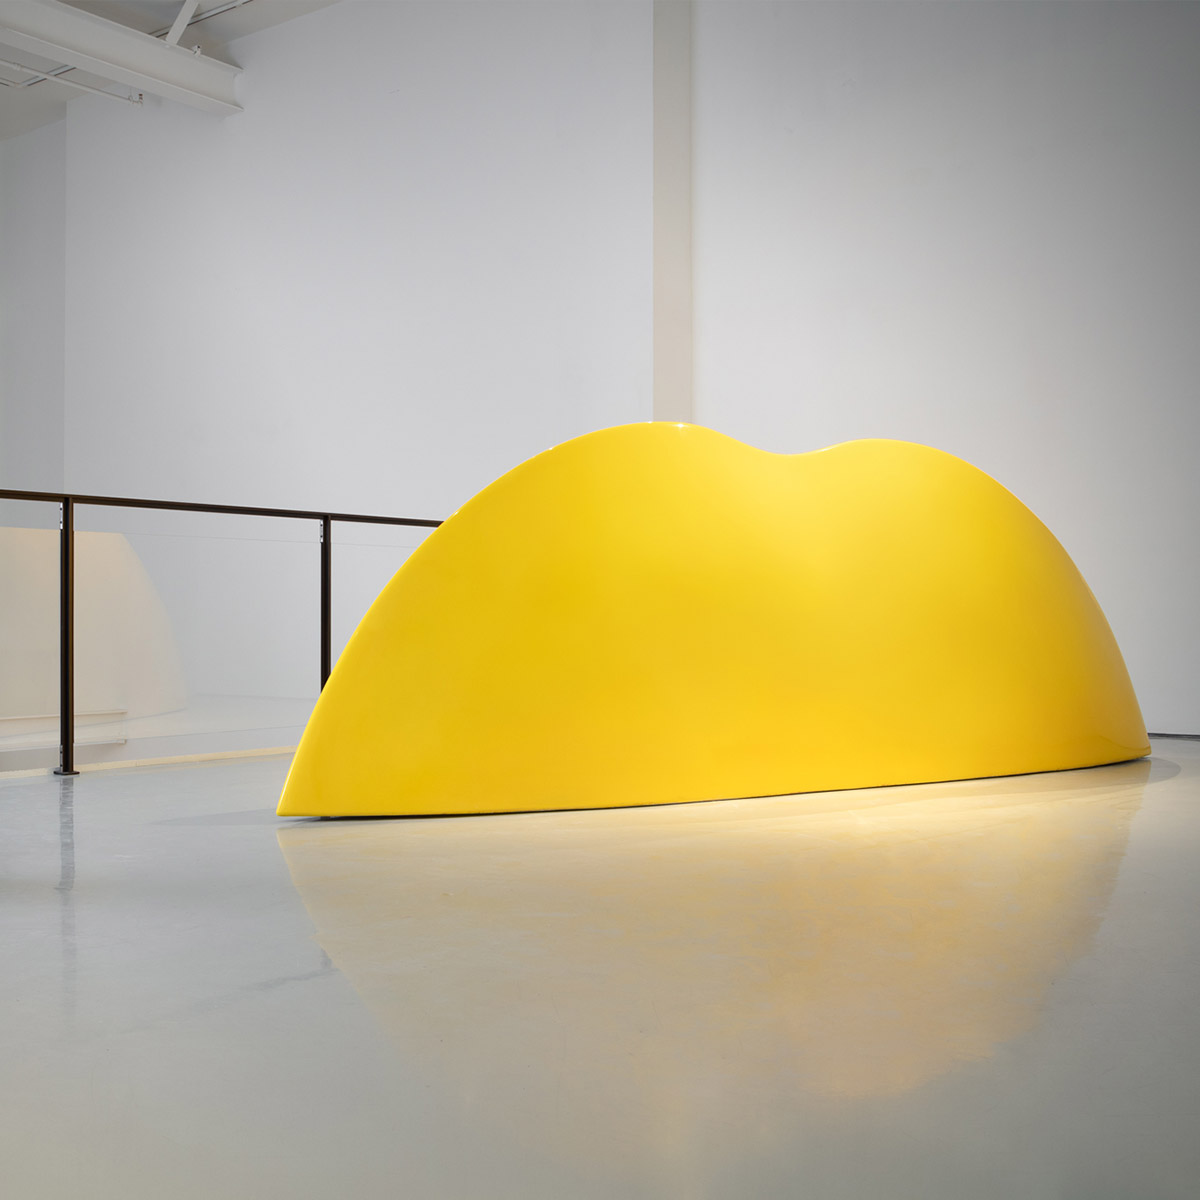 Wendell Castle, Yellow Arch, 1971